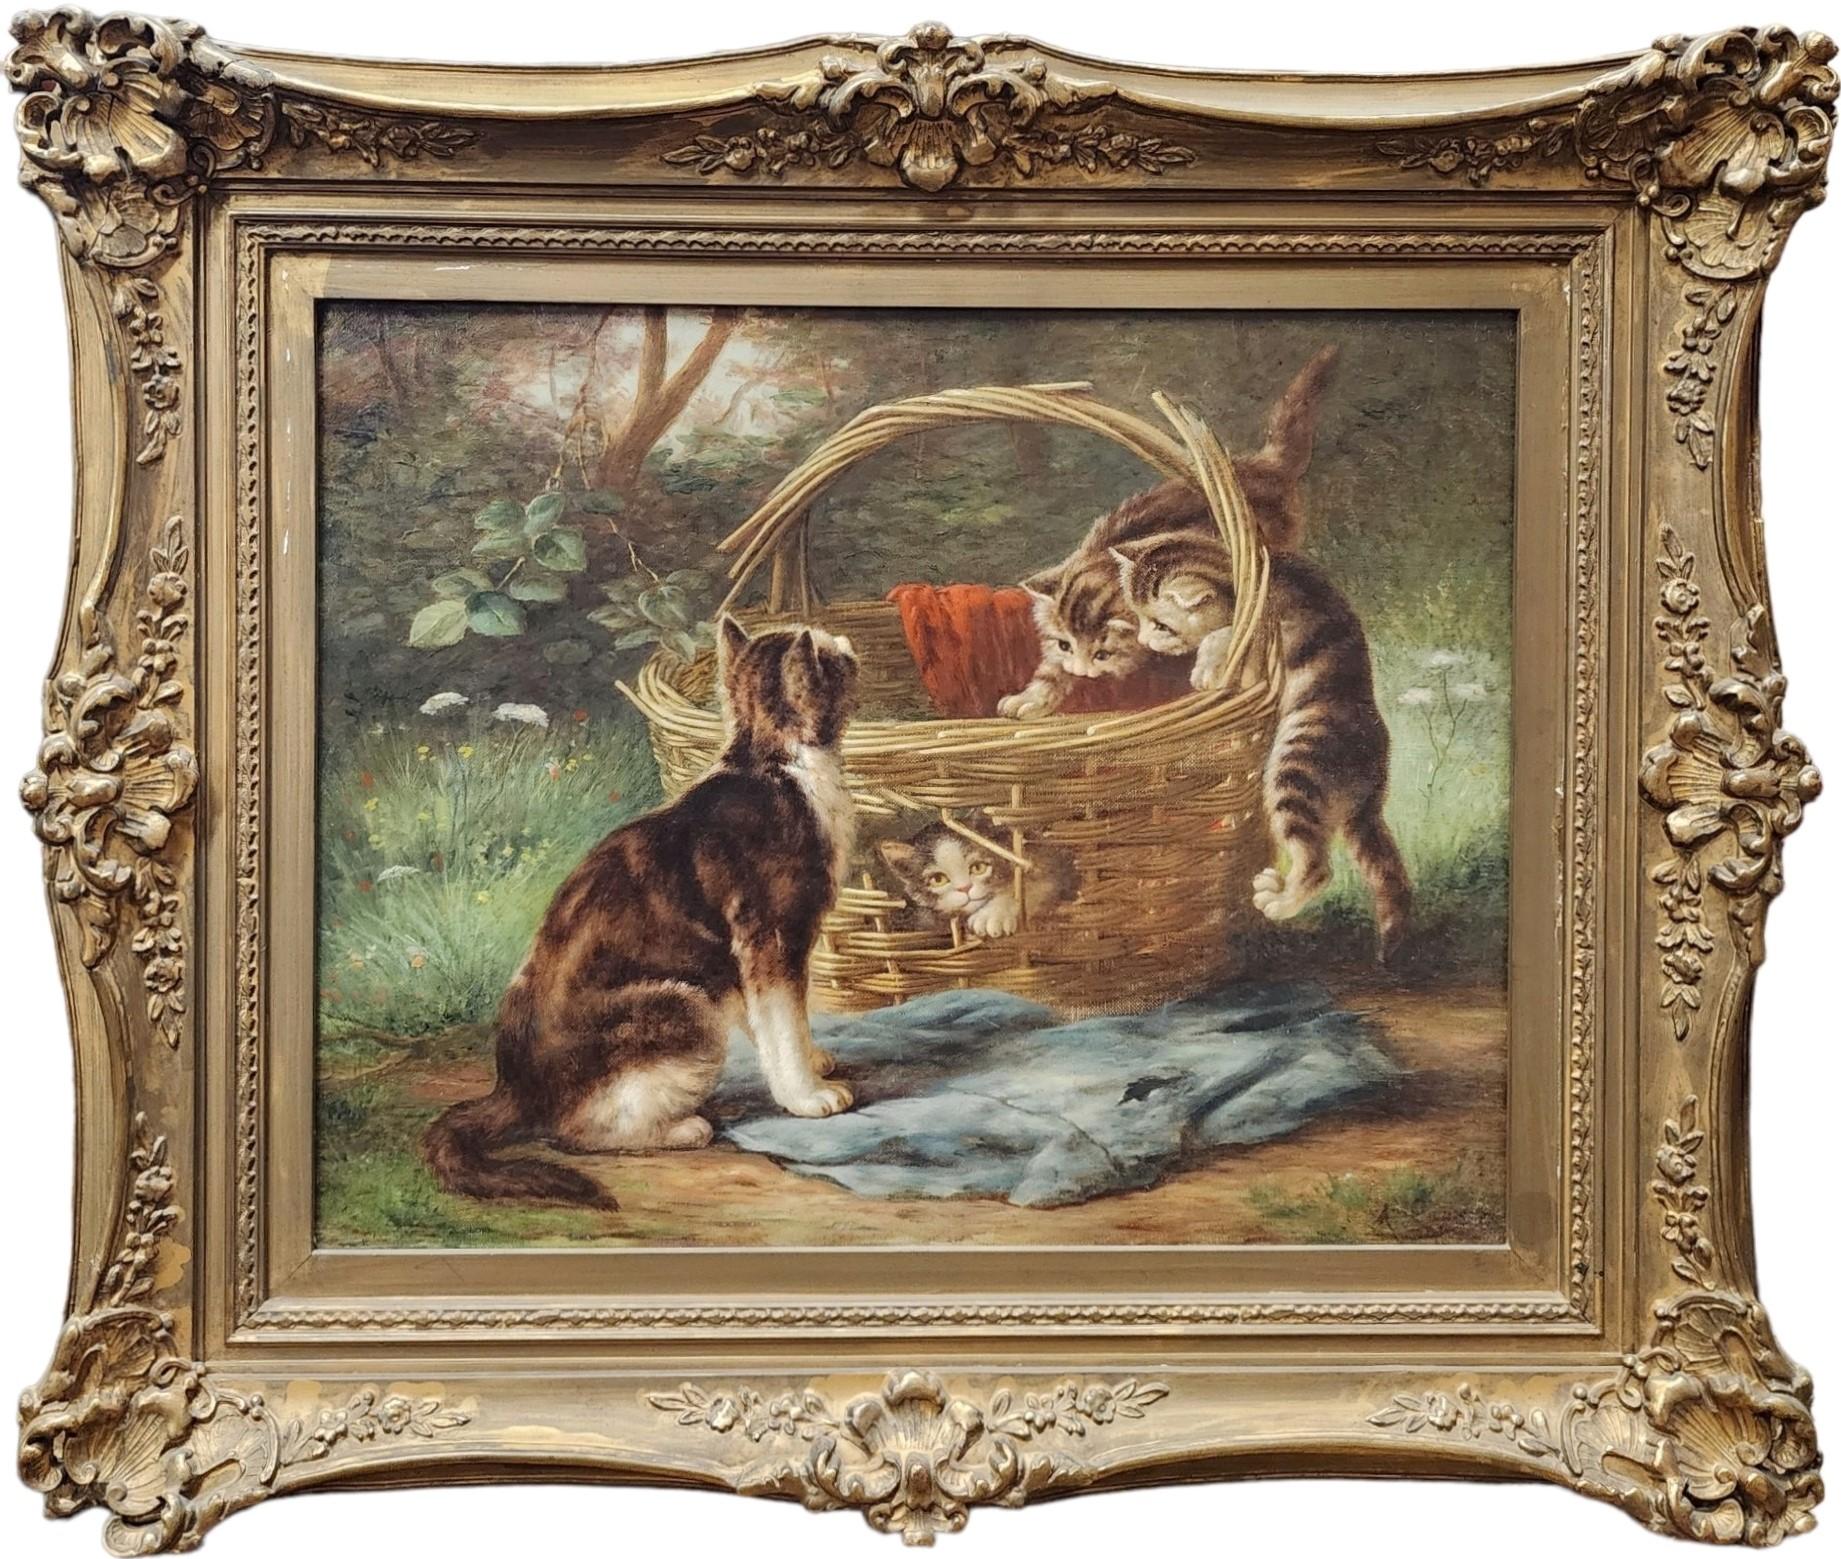 August Laux Animal Painting - Hide and Seek, 1880 Oil on Canvas, Kittens in Basket, Cats, Cat, Kitten, Pet